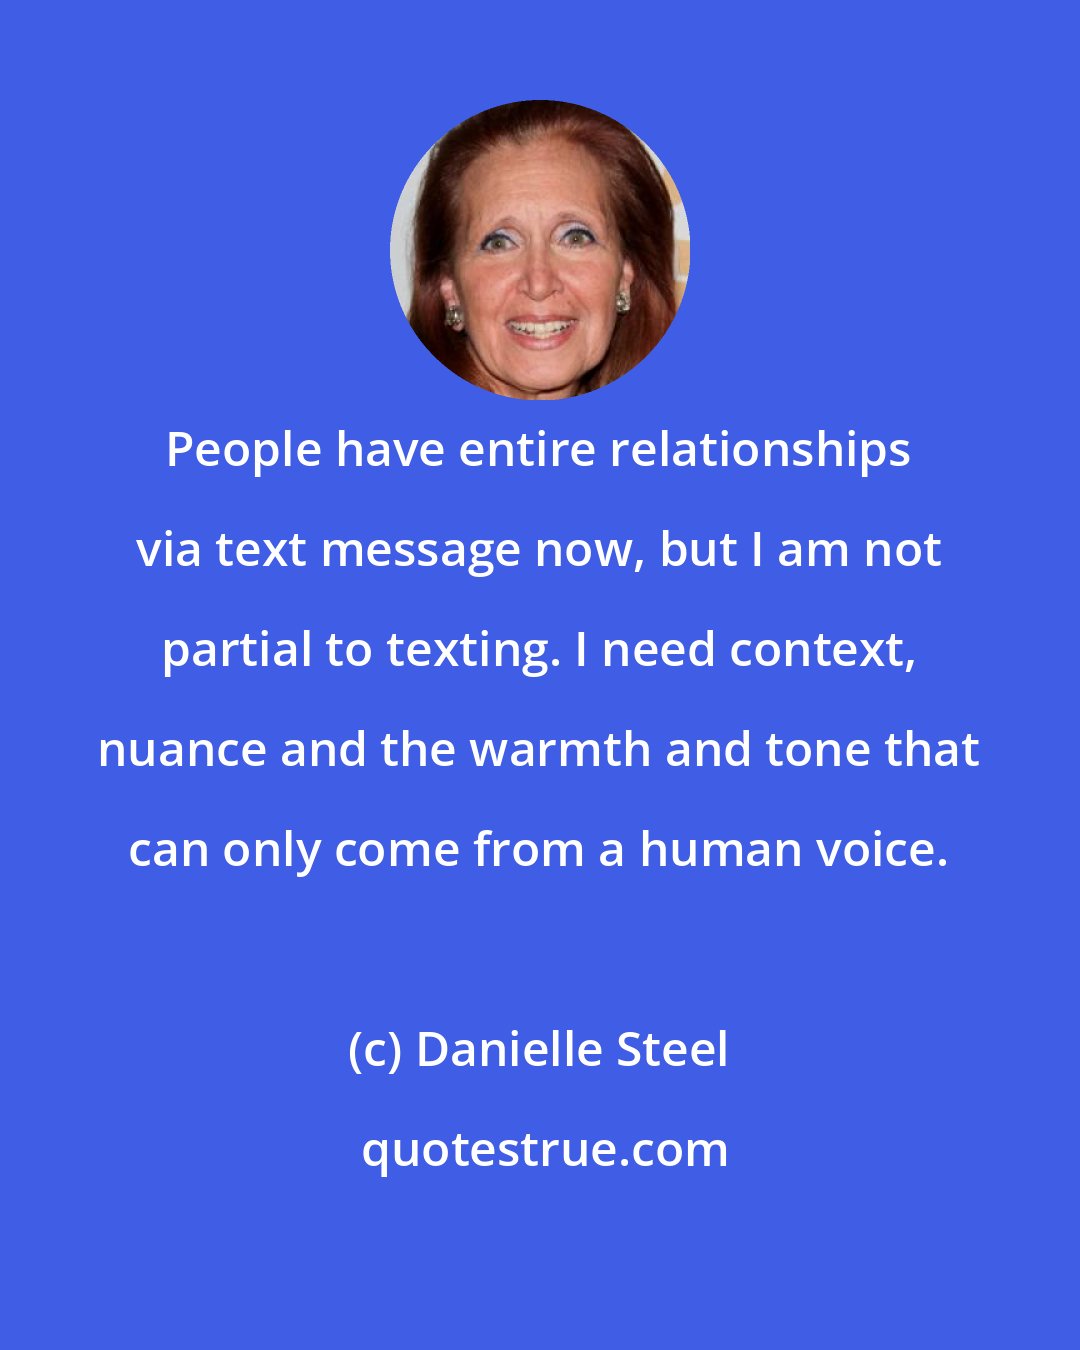 Danielle Steel: People have entire relationships via text message now, but I am not partial to texting. I need context, nuance and the warmth and tone that can only come from a human voice.